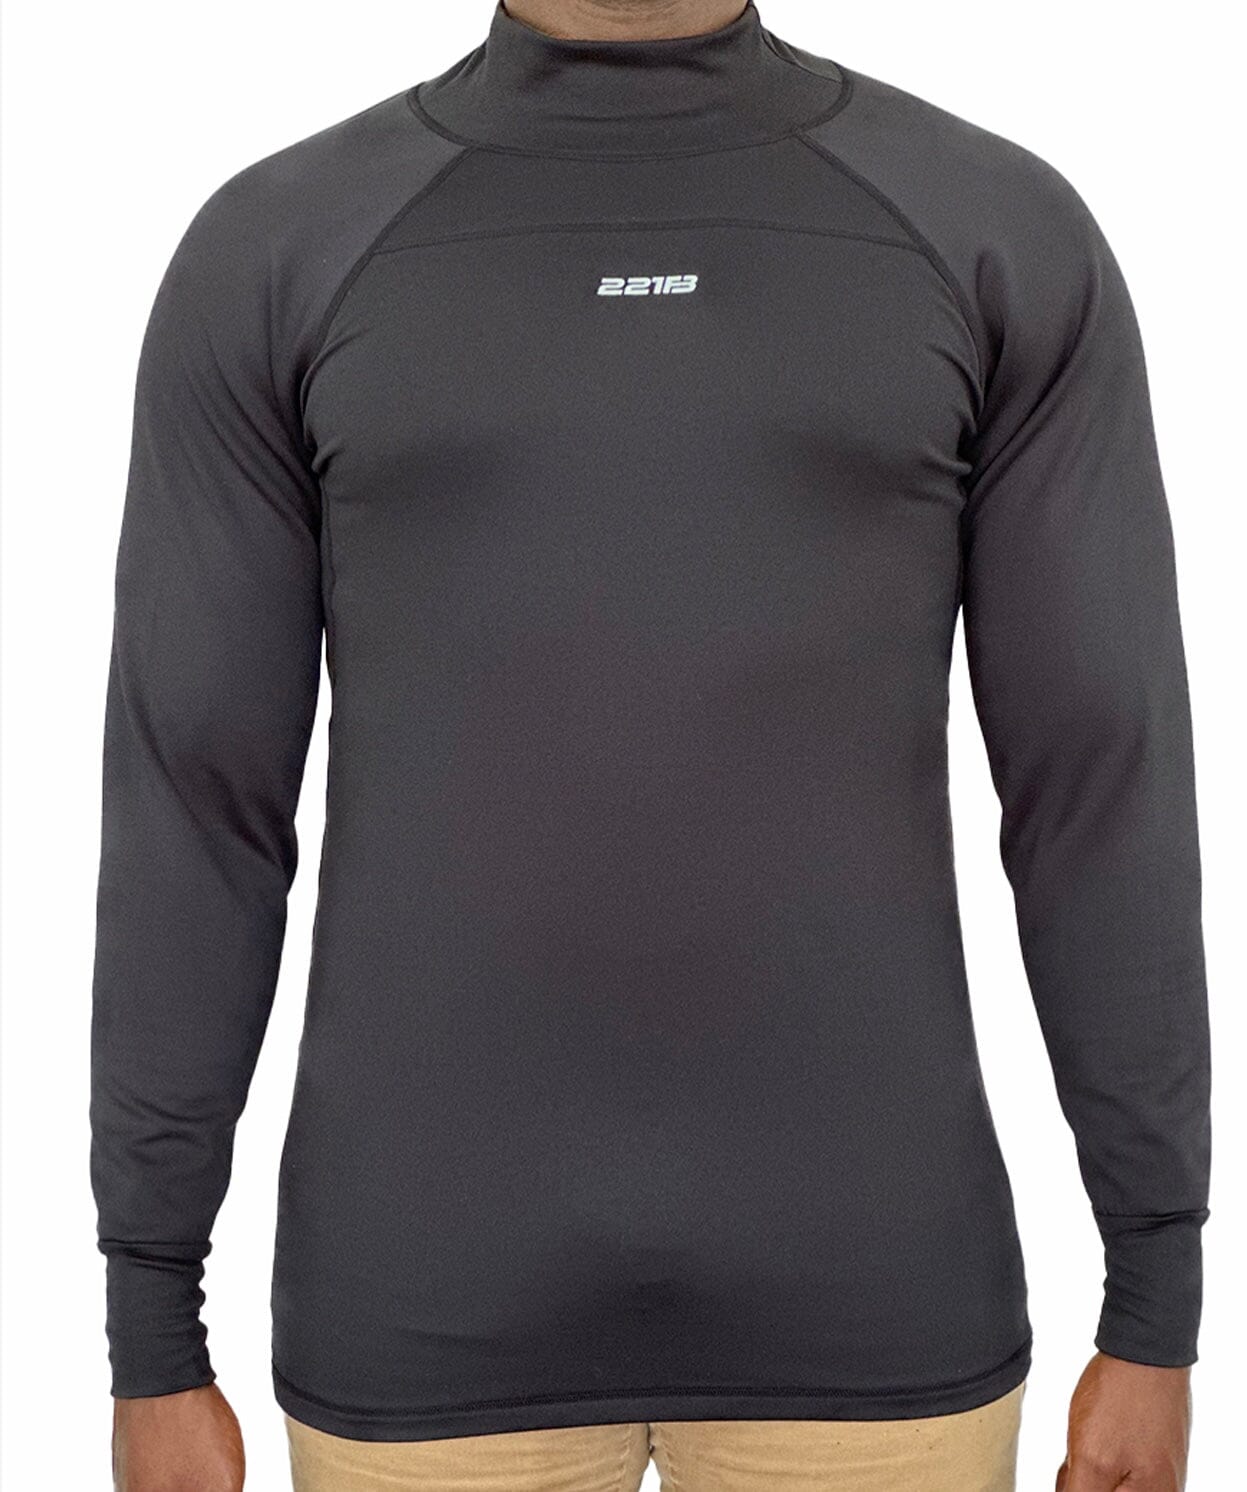 ESSENTIAL BASE LAYERS